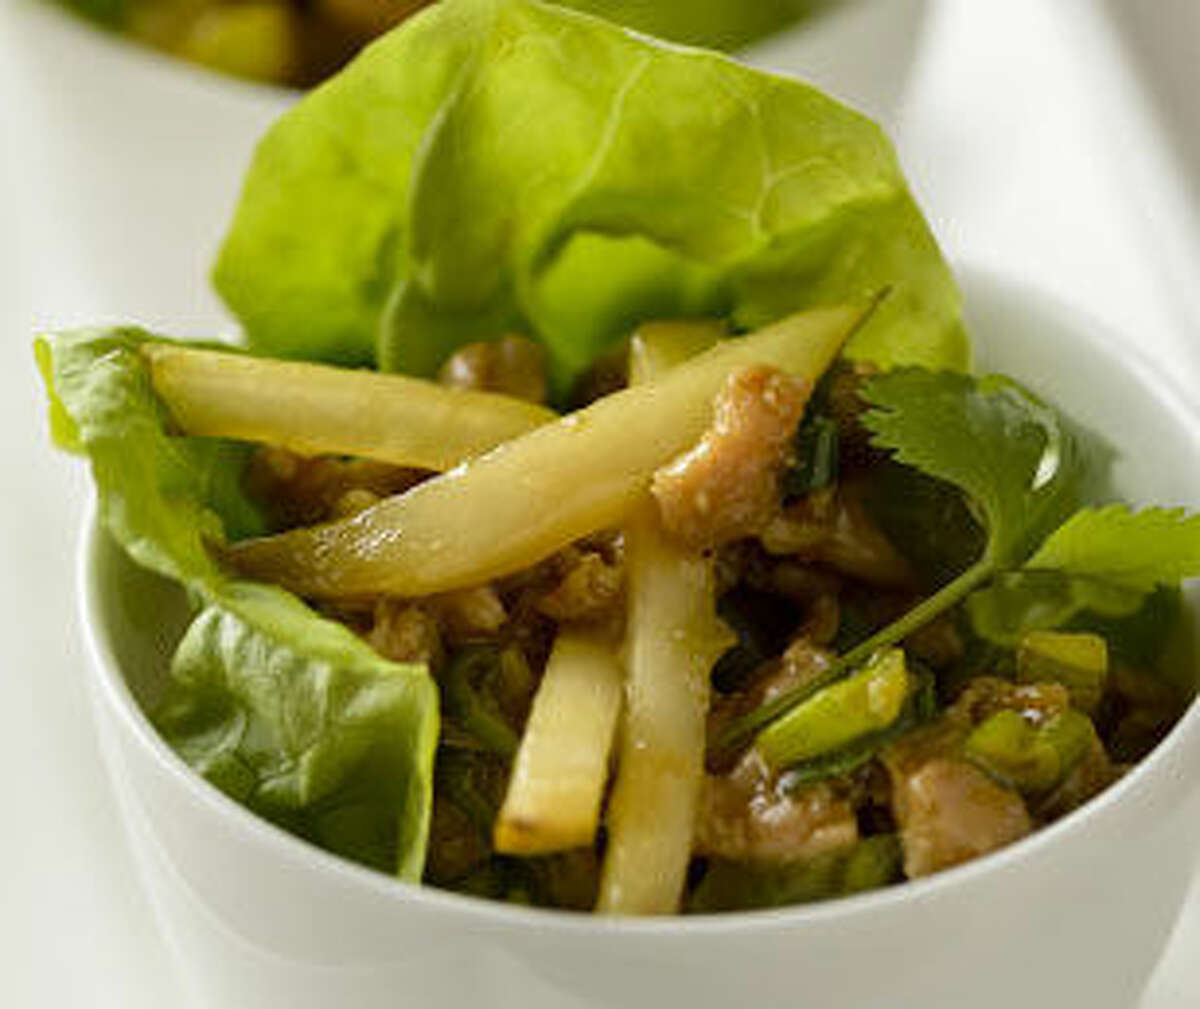 Fresh crisp pears give these savory chicken lettuce wraps a sweet flavor and crunch.